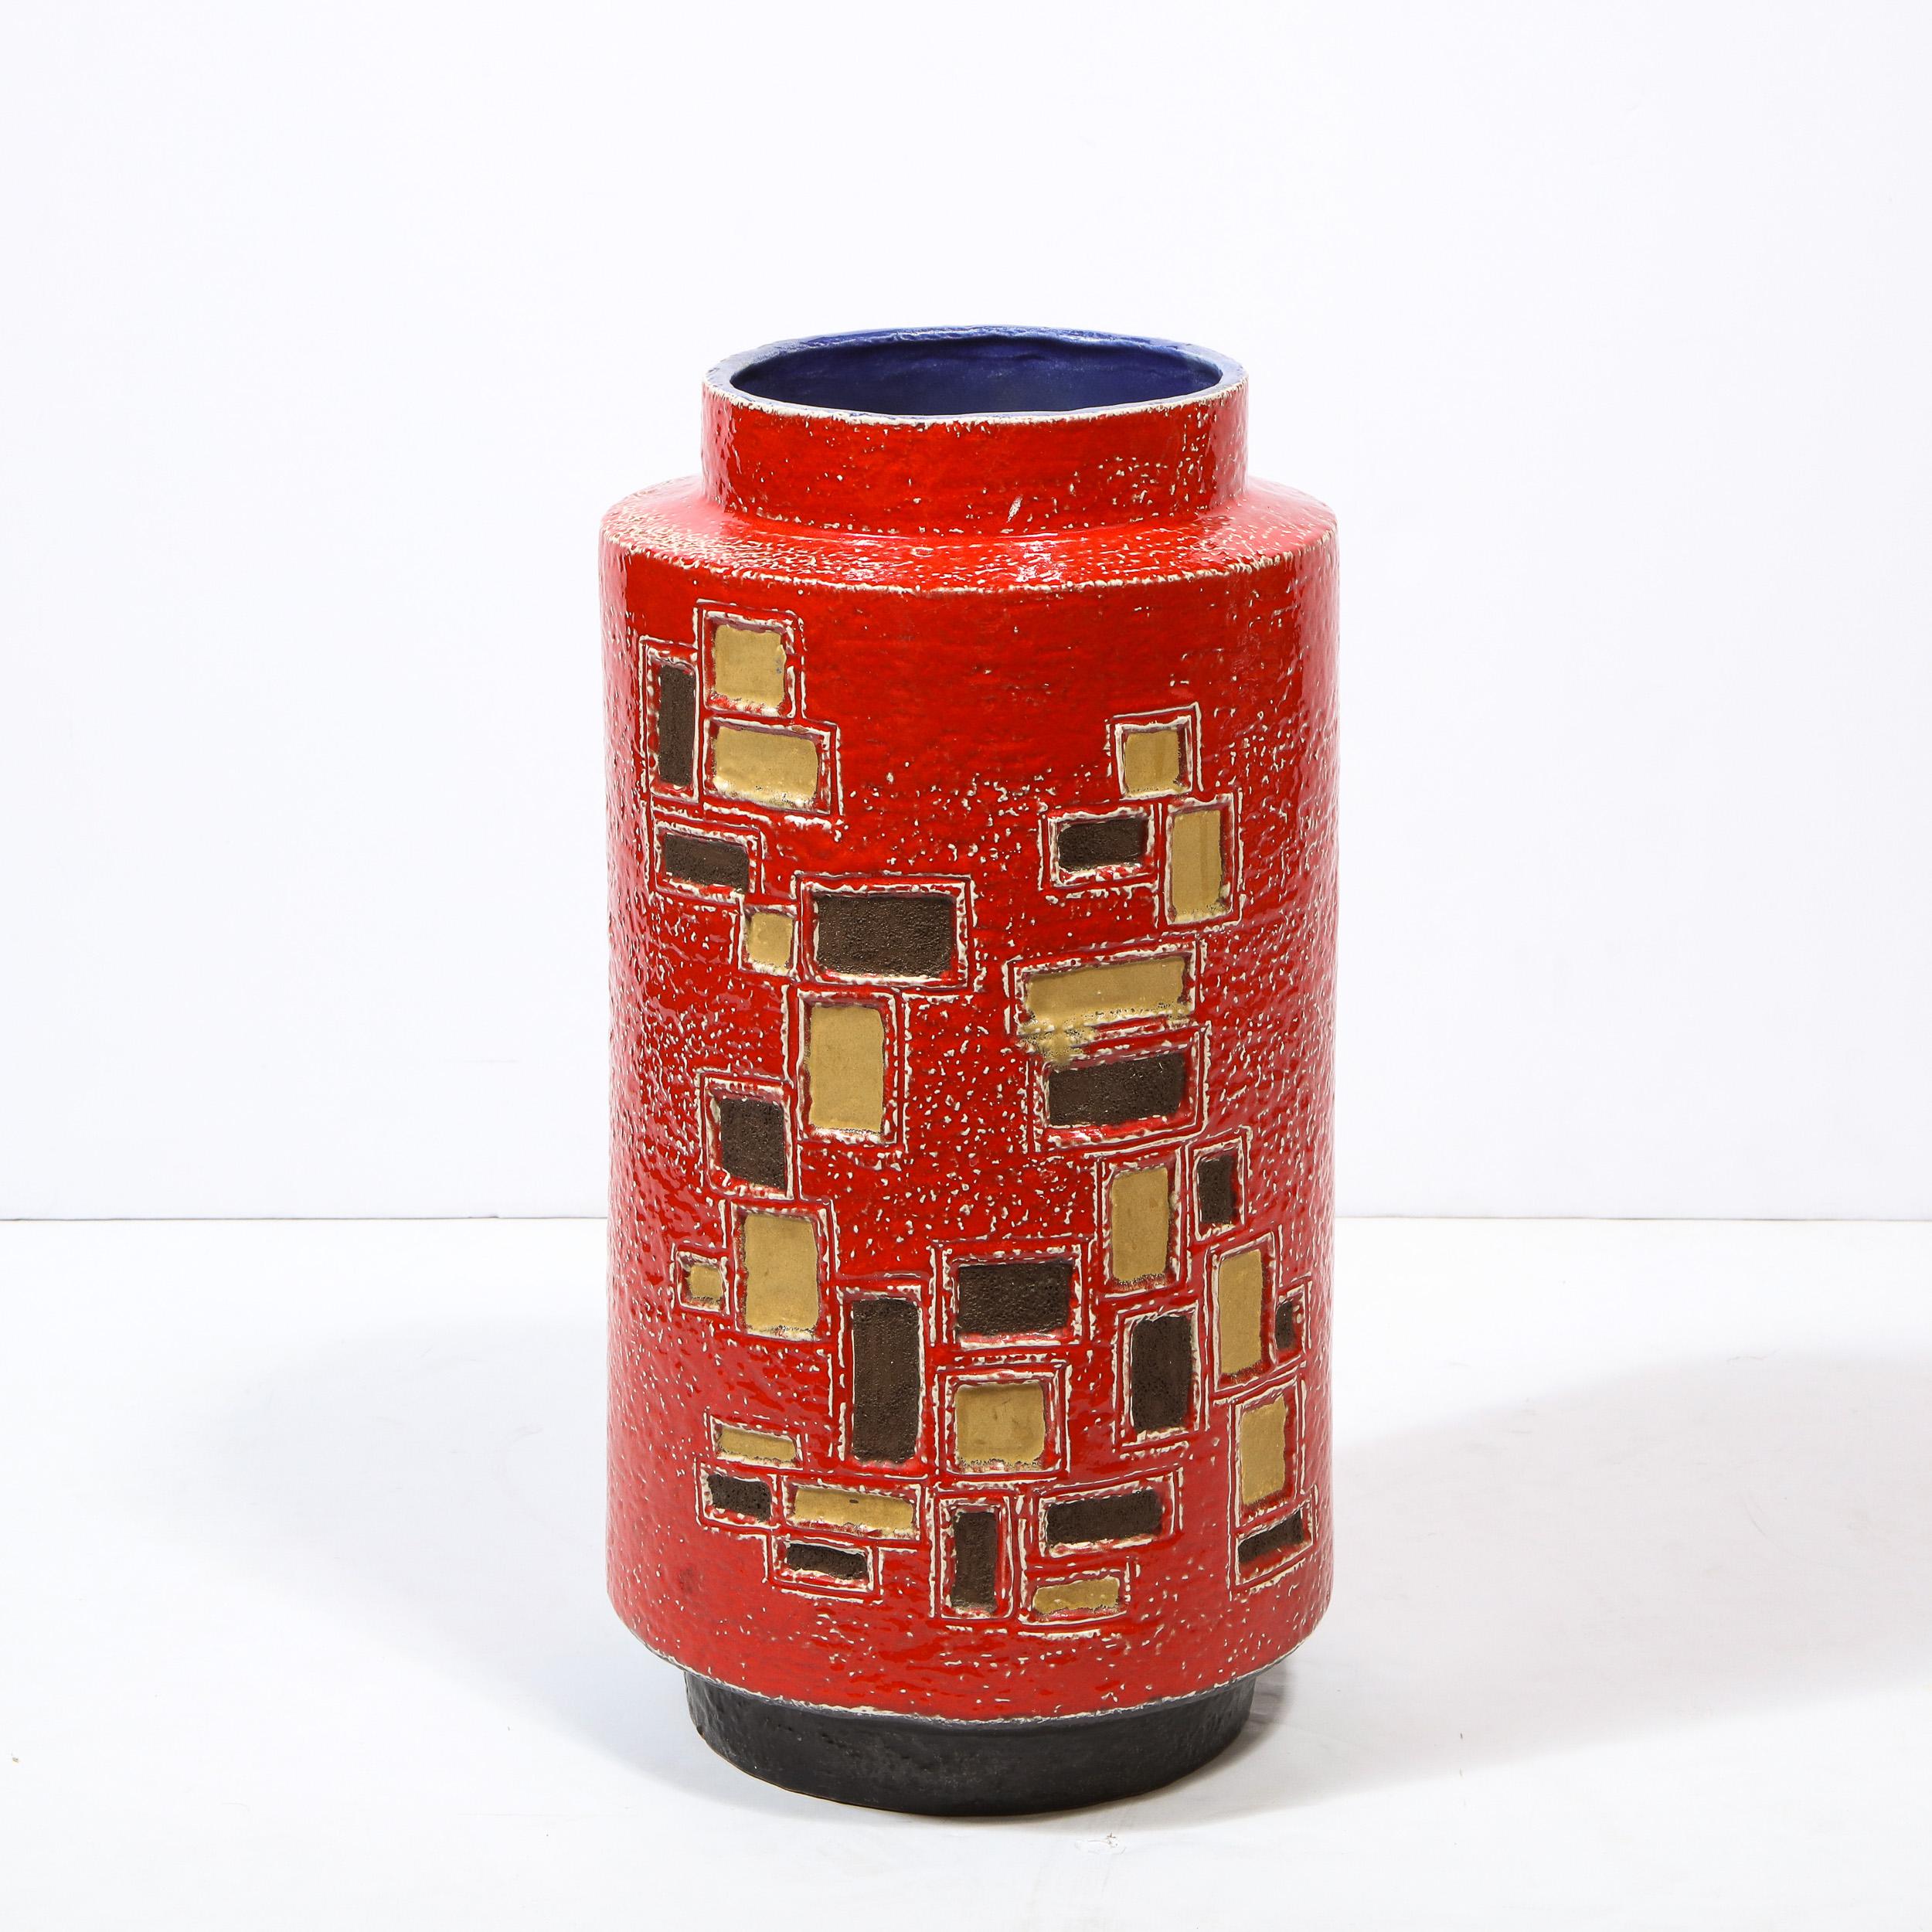 This refined Mid-Century Modern umbrella stand was realized in Italy, circa 1960. It features a cylindrical body with an inset circular mouth with scarlet red handpainted exterior replete with gold and java hued rectilinear detailing, as well as a